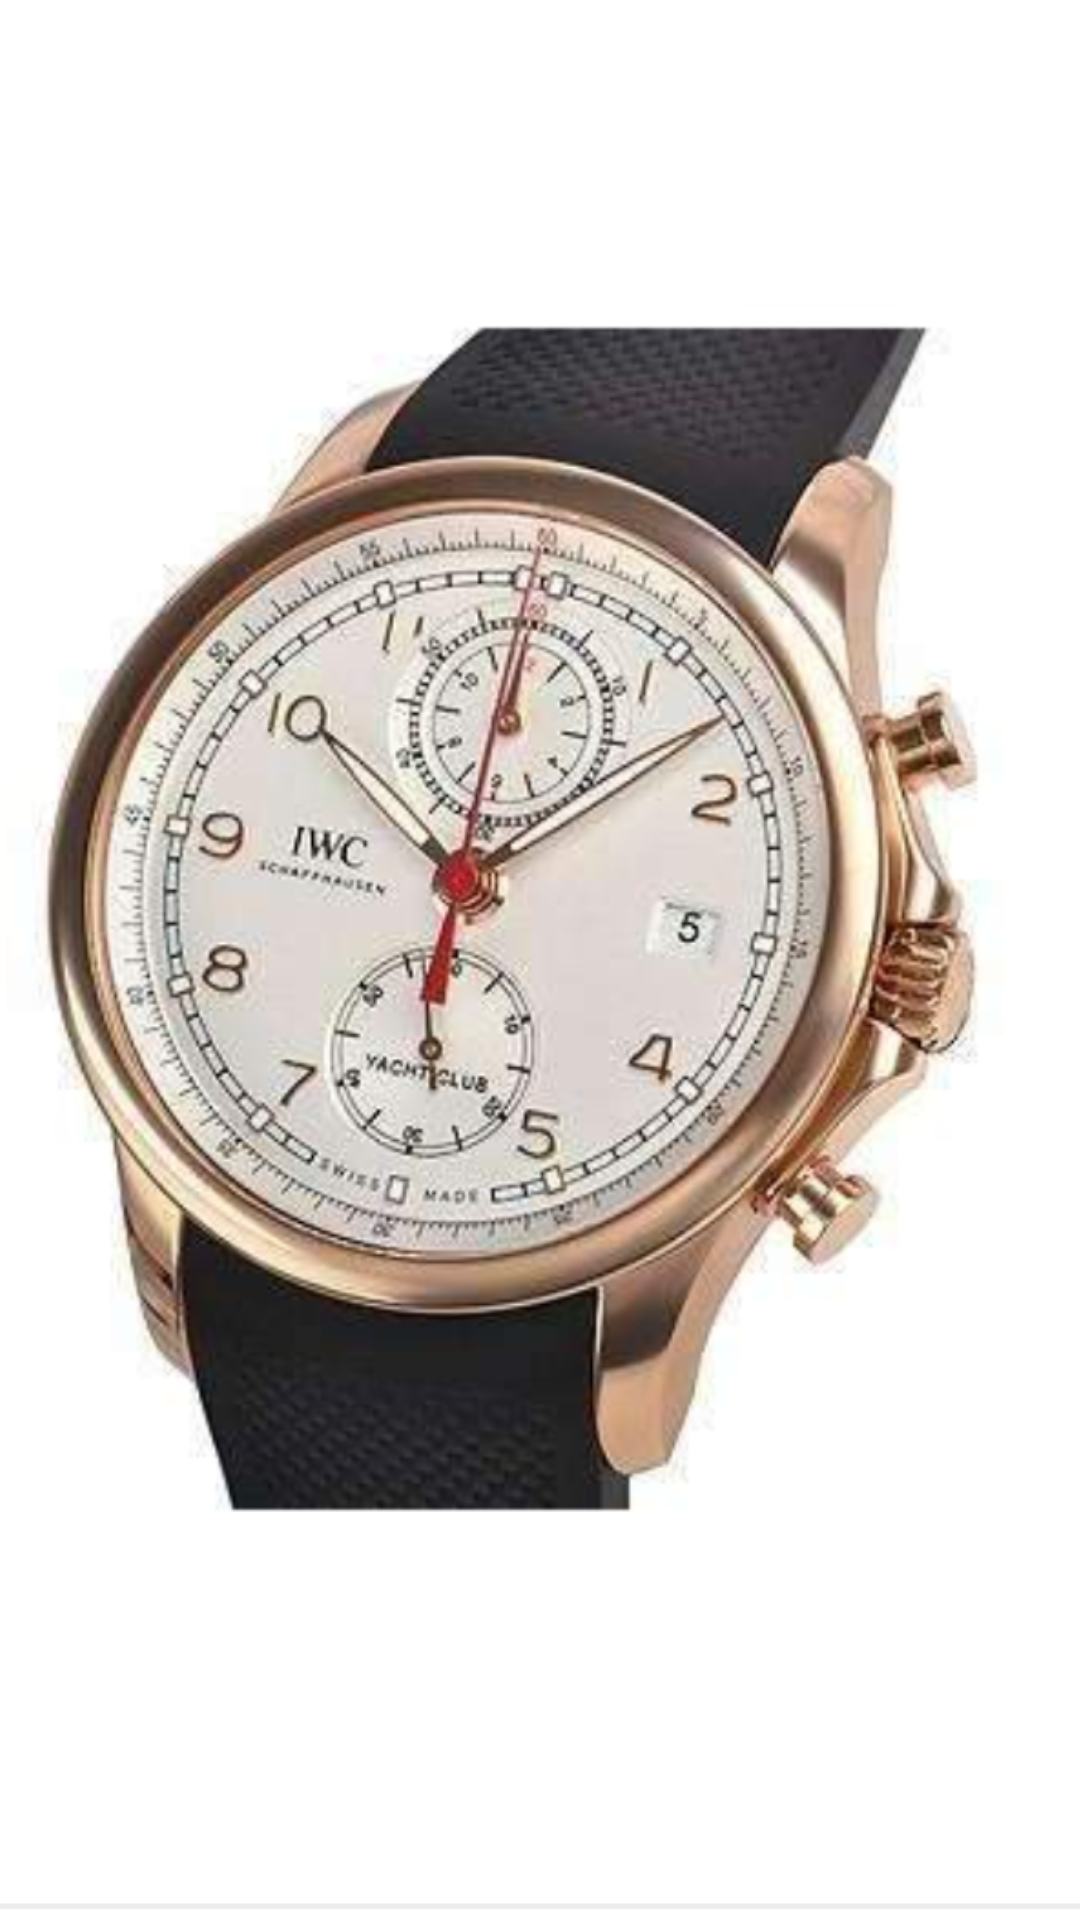 IWC - Design IW390501 New , Boxed & Certified – 2 Year Guarantee RRP £18,500 – Subject to - Image 3 of 4